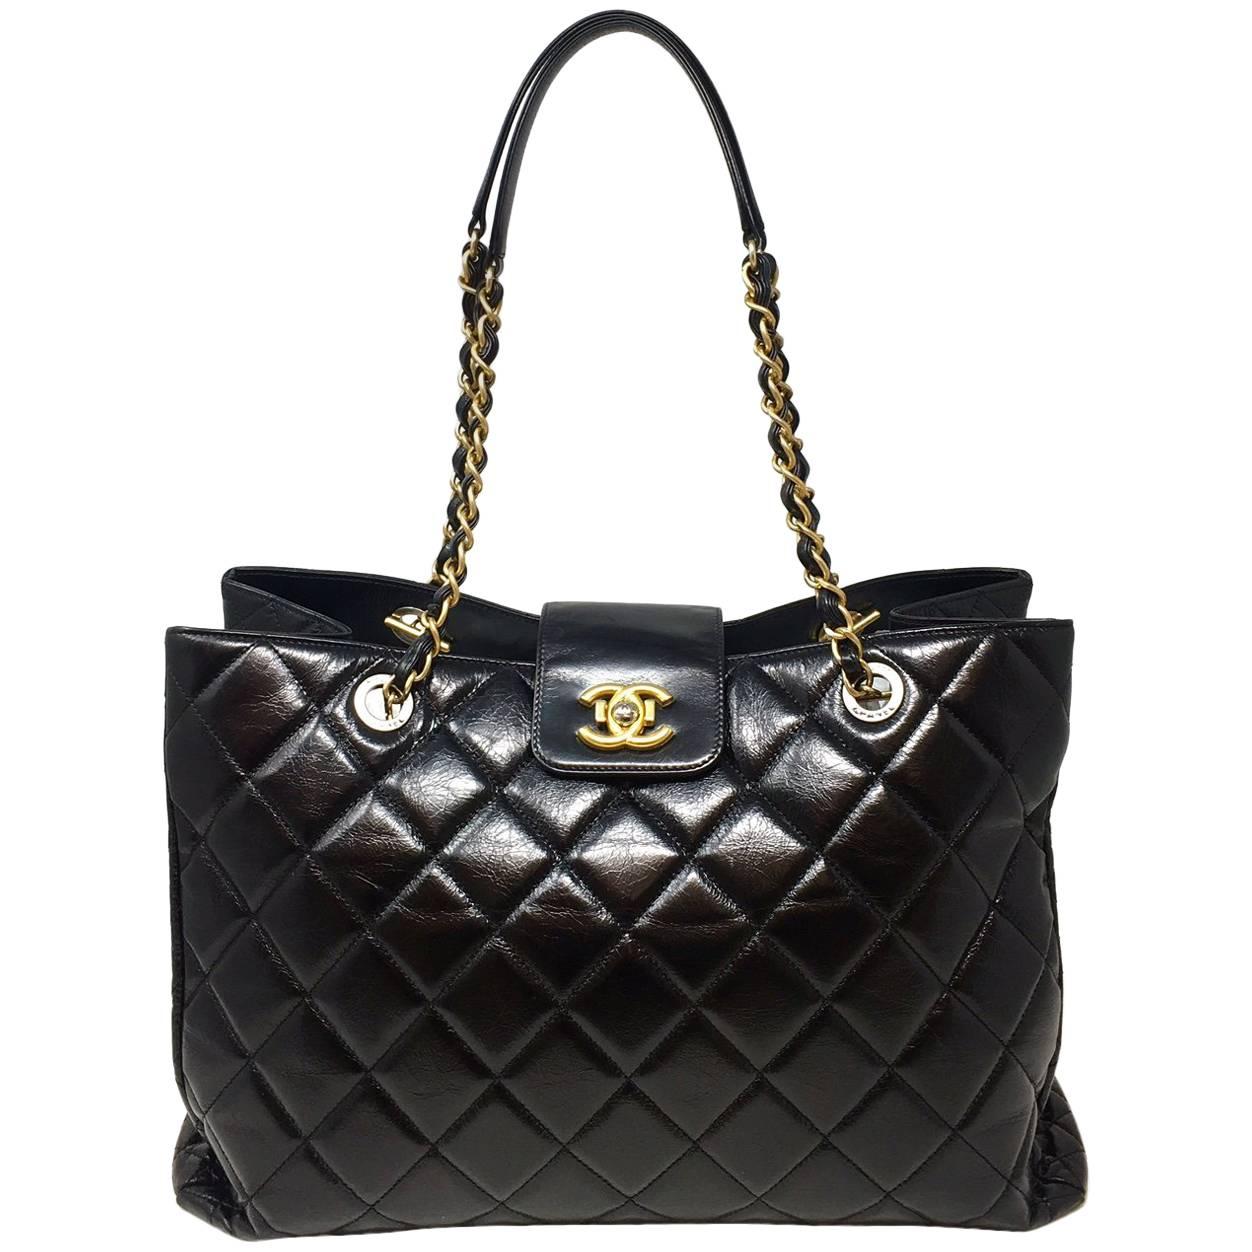 Chanel Shopping Tote Bag , Aged Calfskin Black Leather , 2016